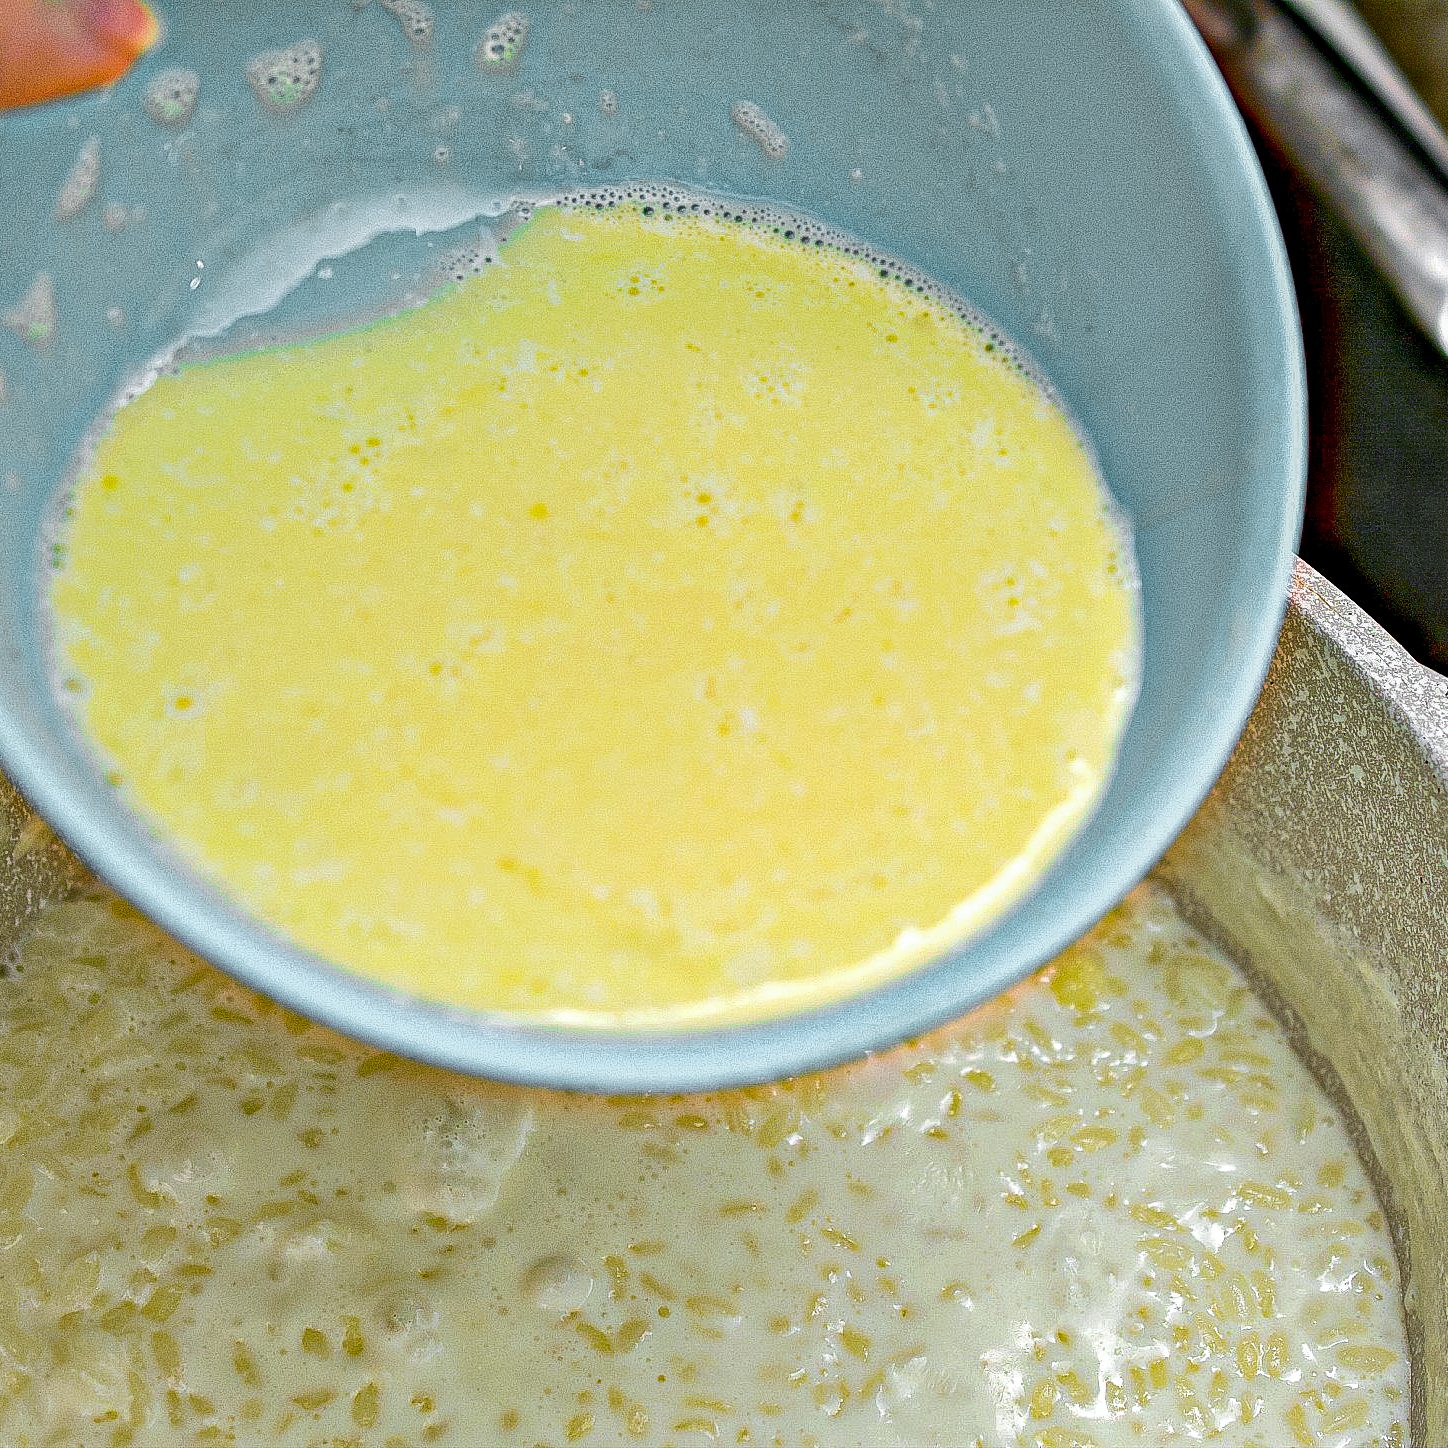 Slowly whisk the tempered egg and milk mixture into the rice pudding.